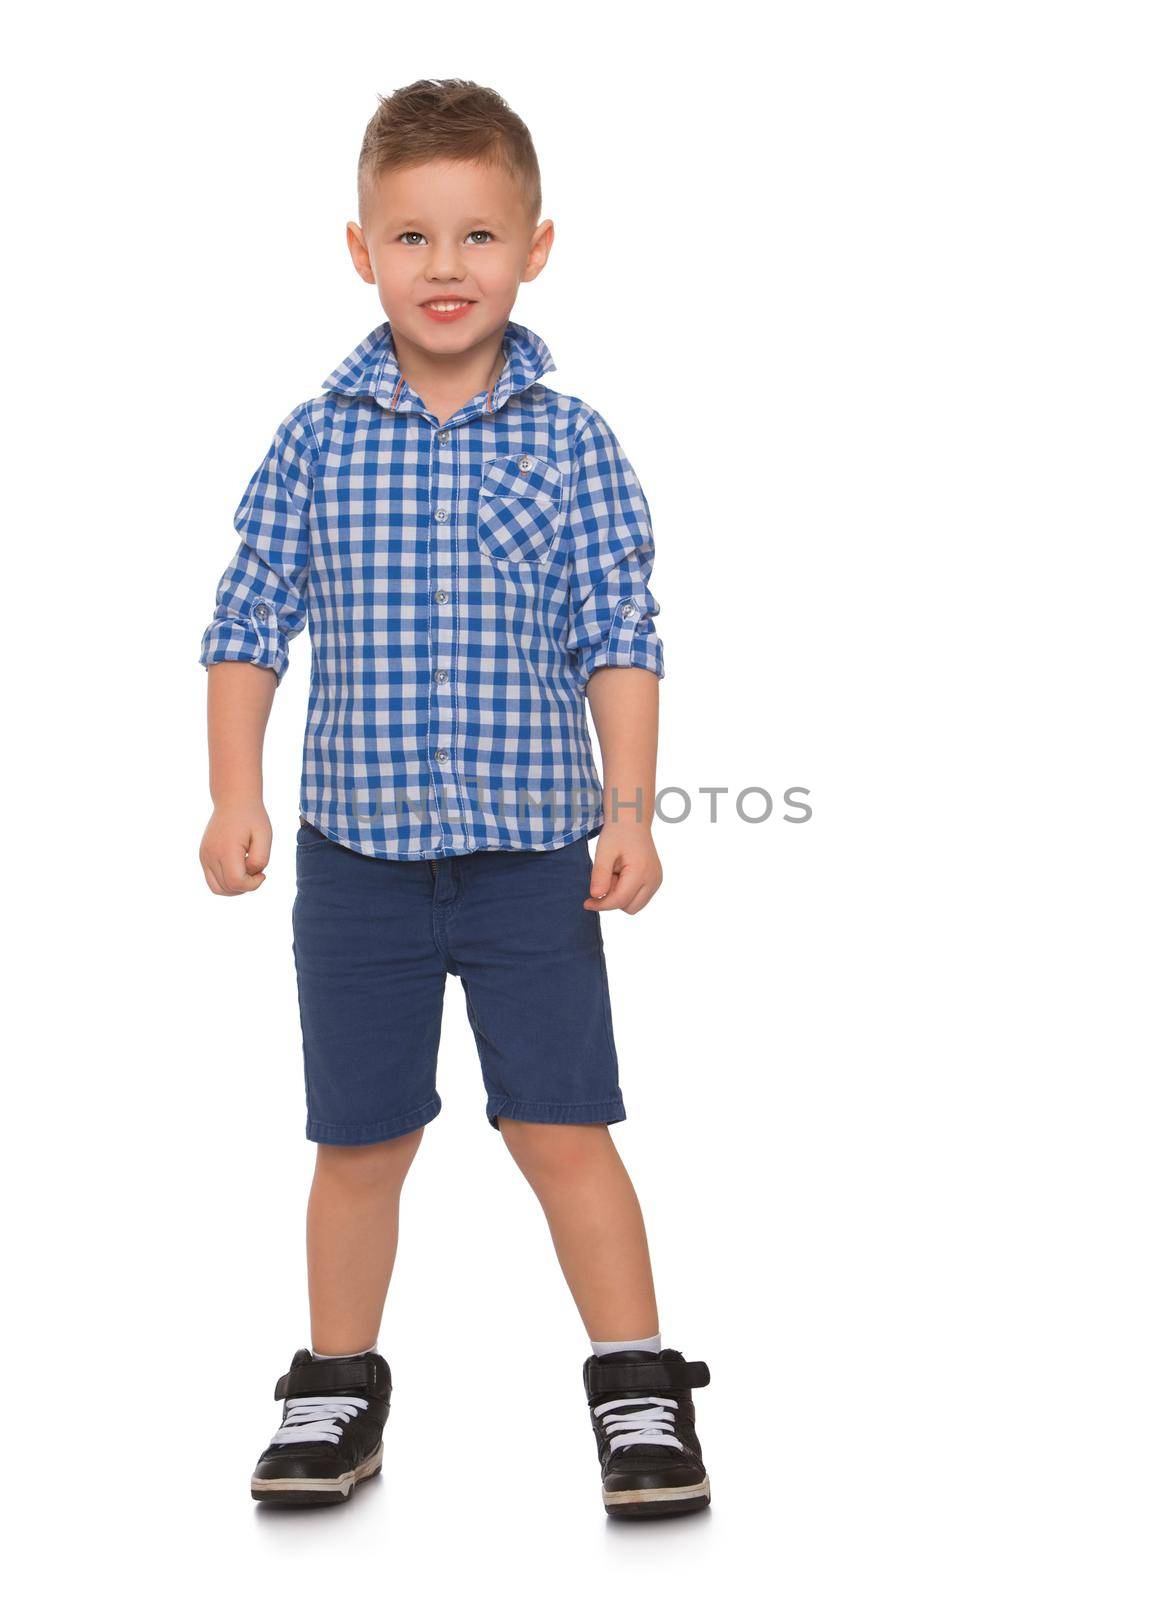 Nice little boy in shirt and shorts looking straight at the camera - Isolated on white background